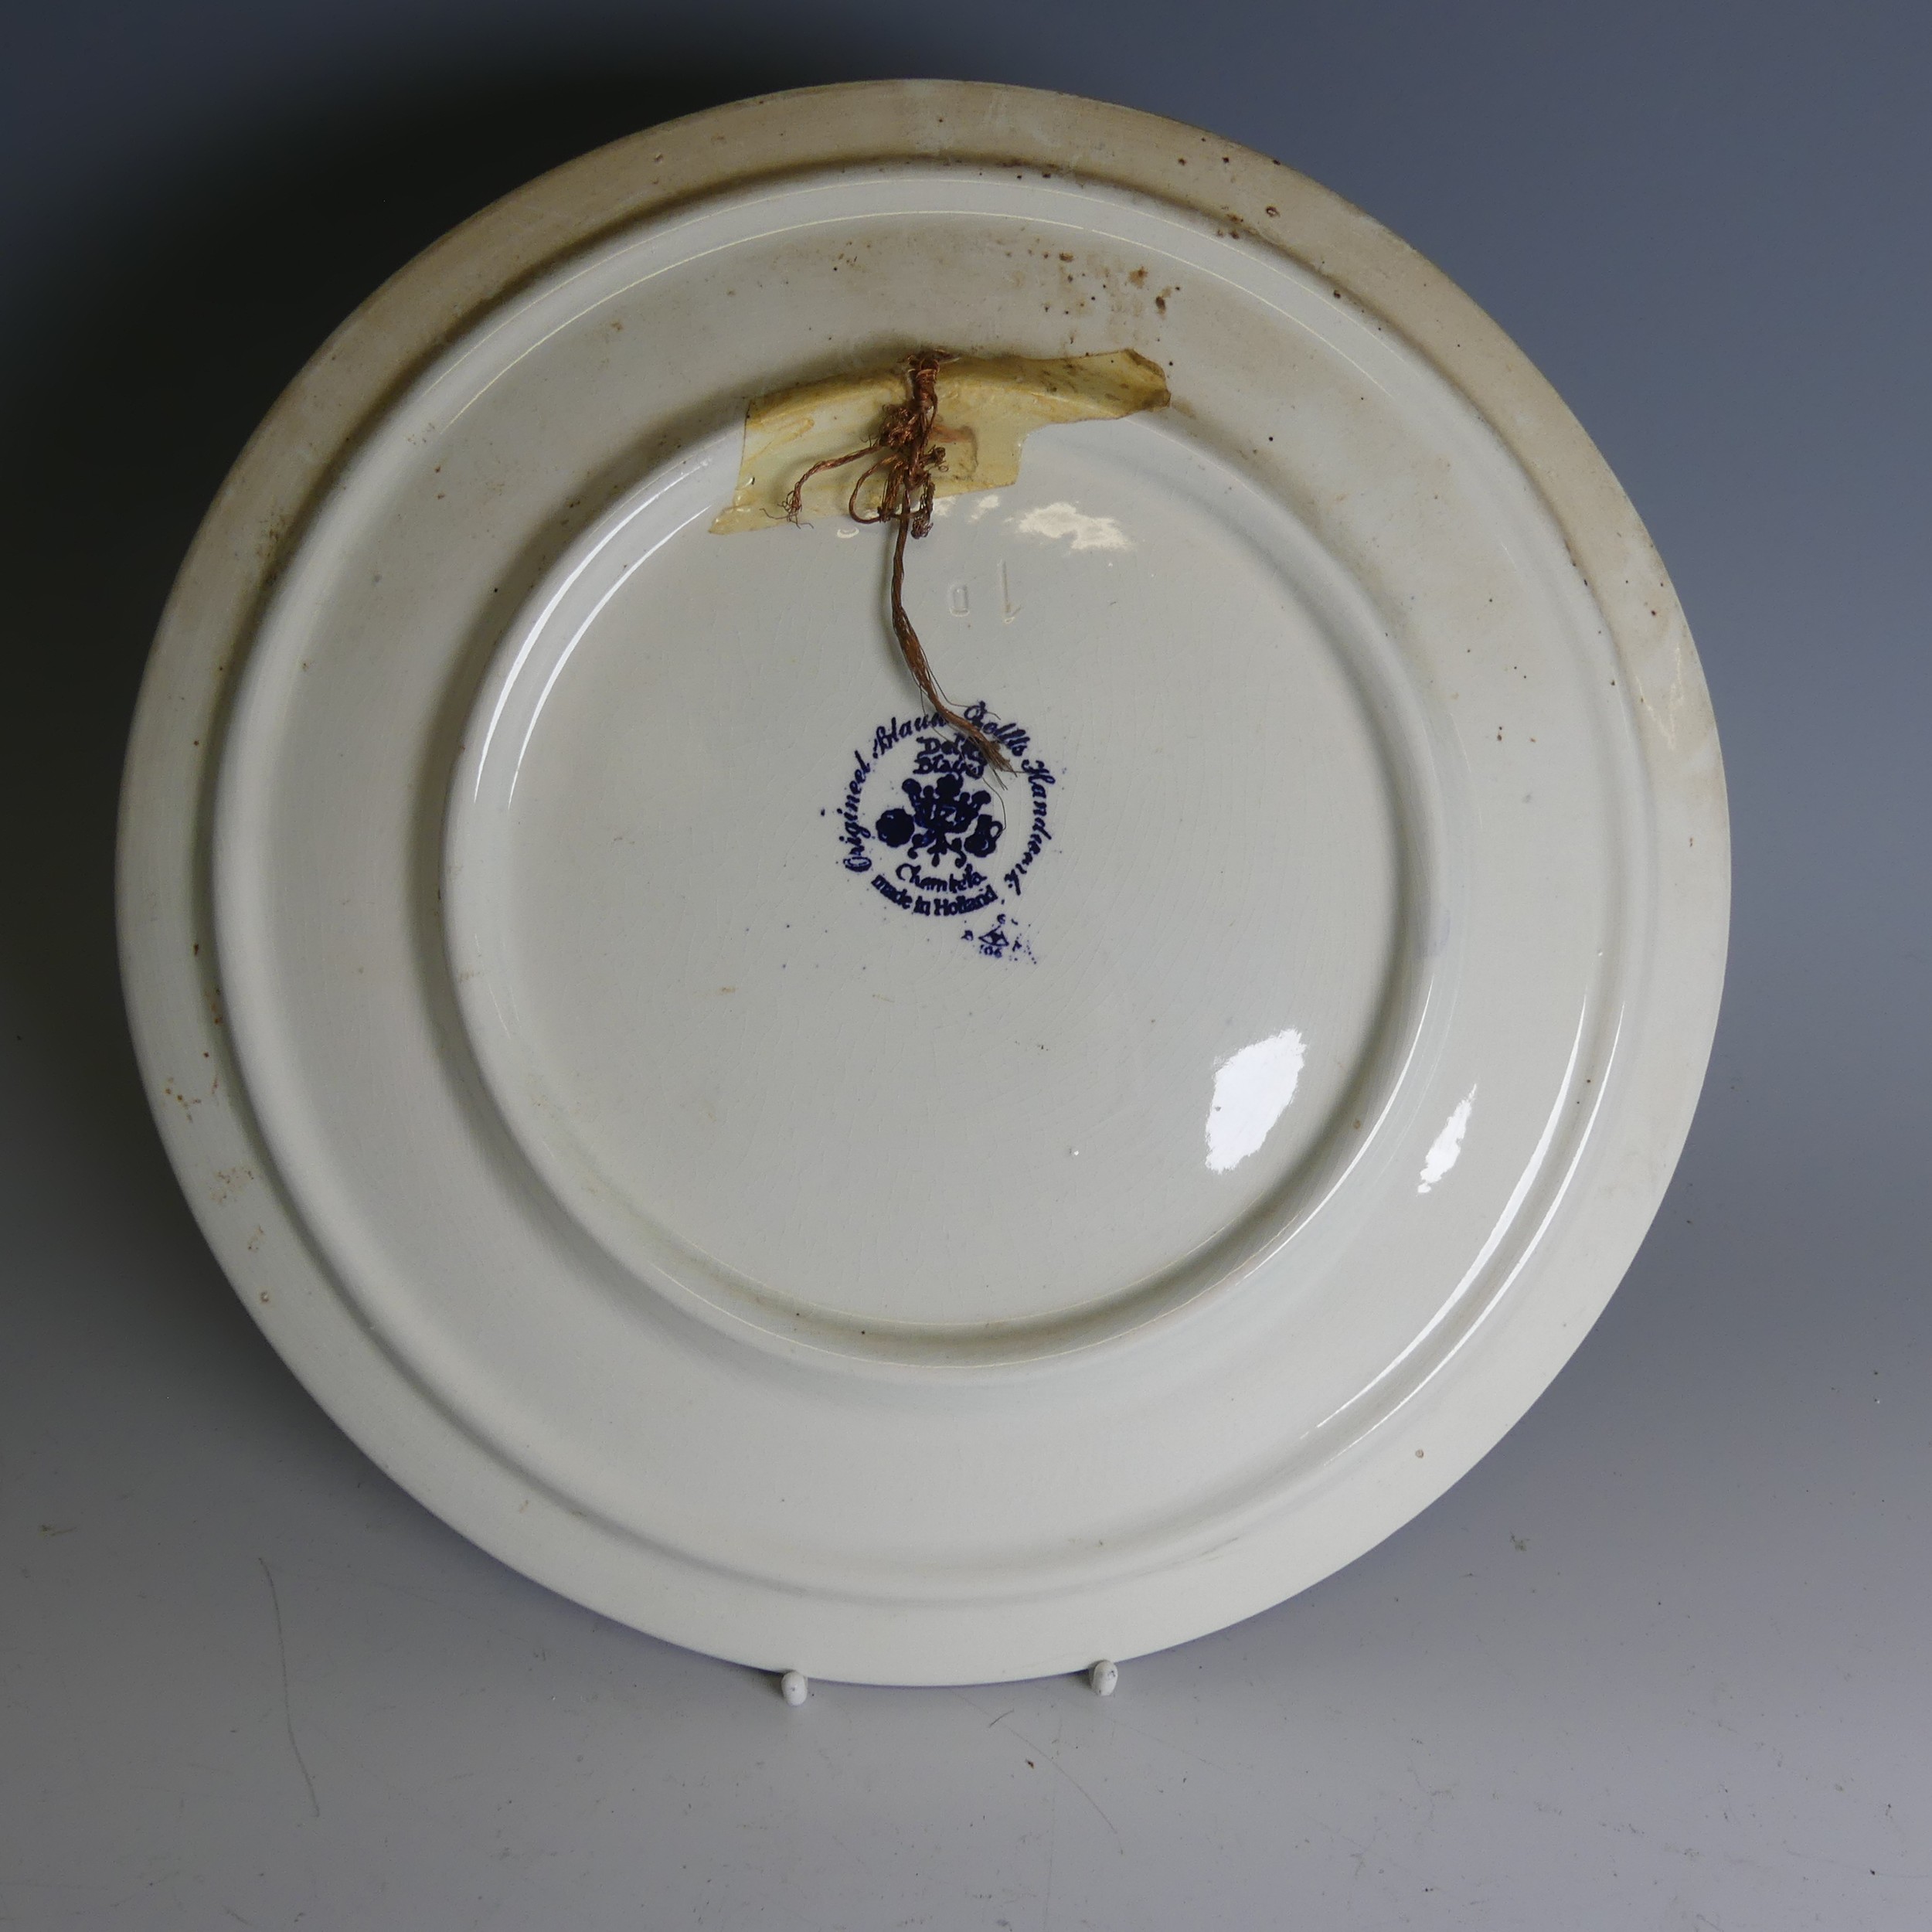 A pair of De Porceleyne Fles Delft pottery Plates, of moulded form, decorated with birds amongst - Image 6 of 10